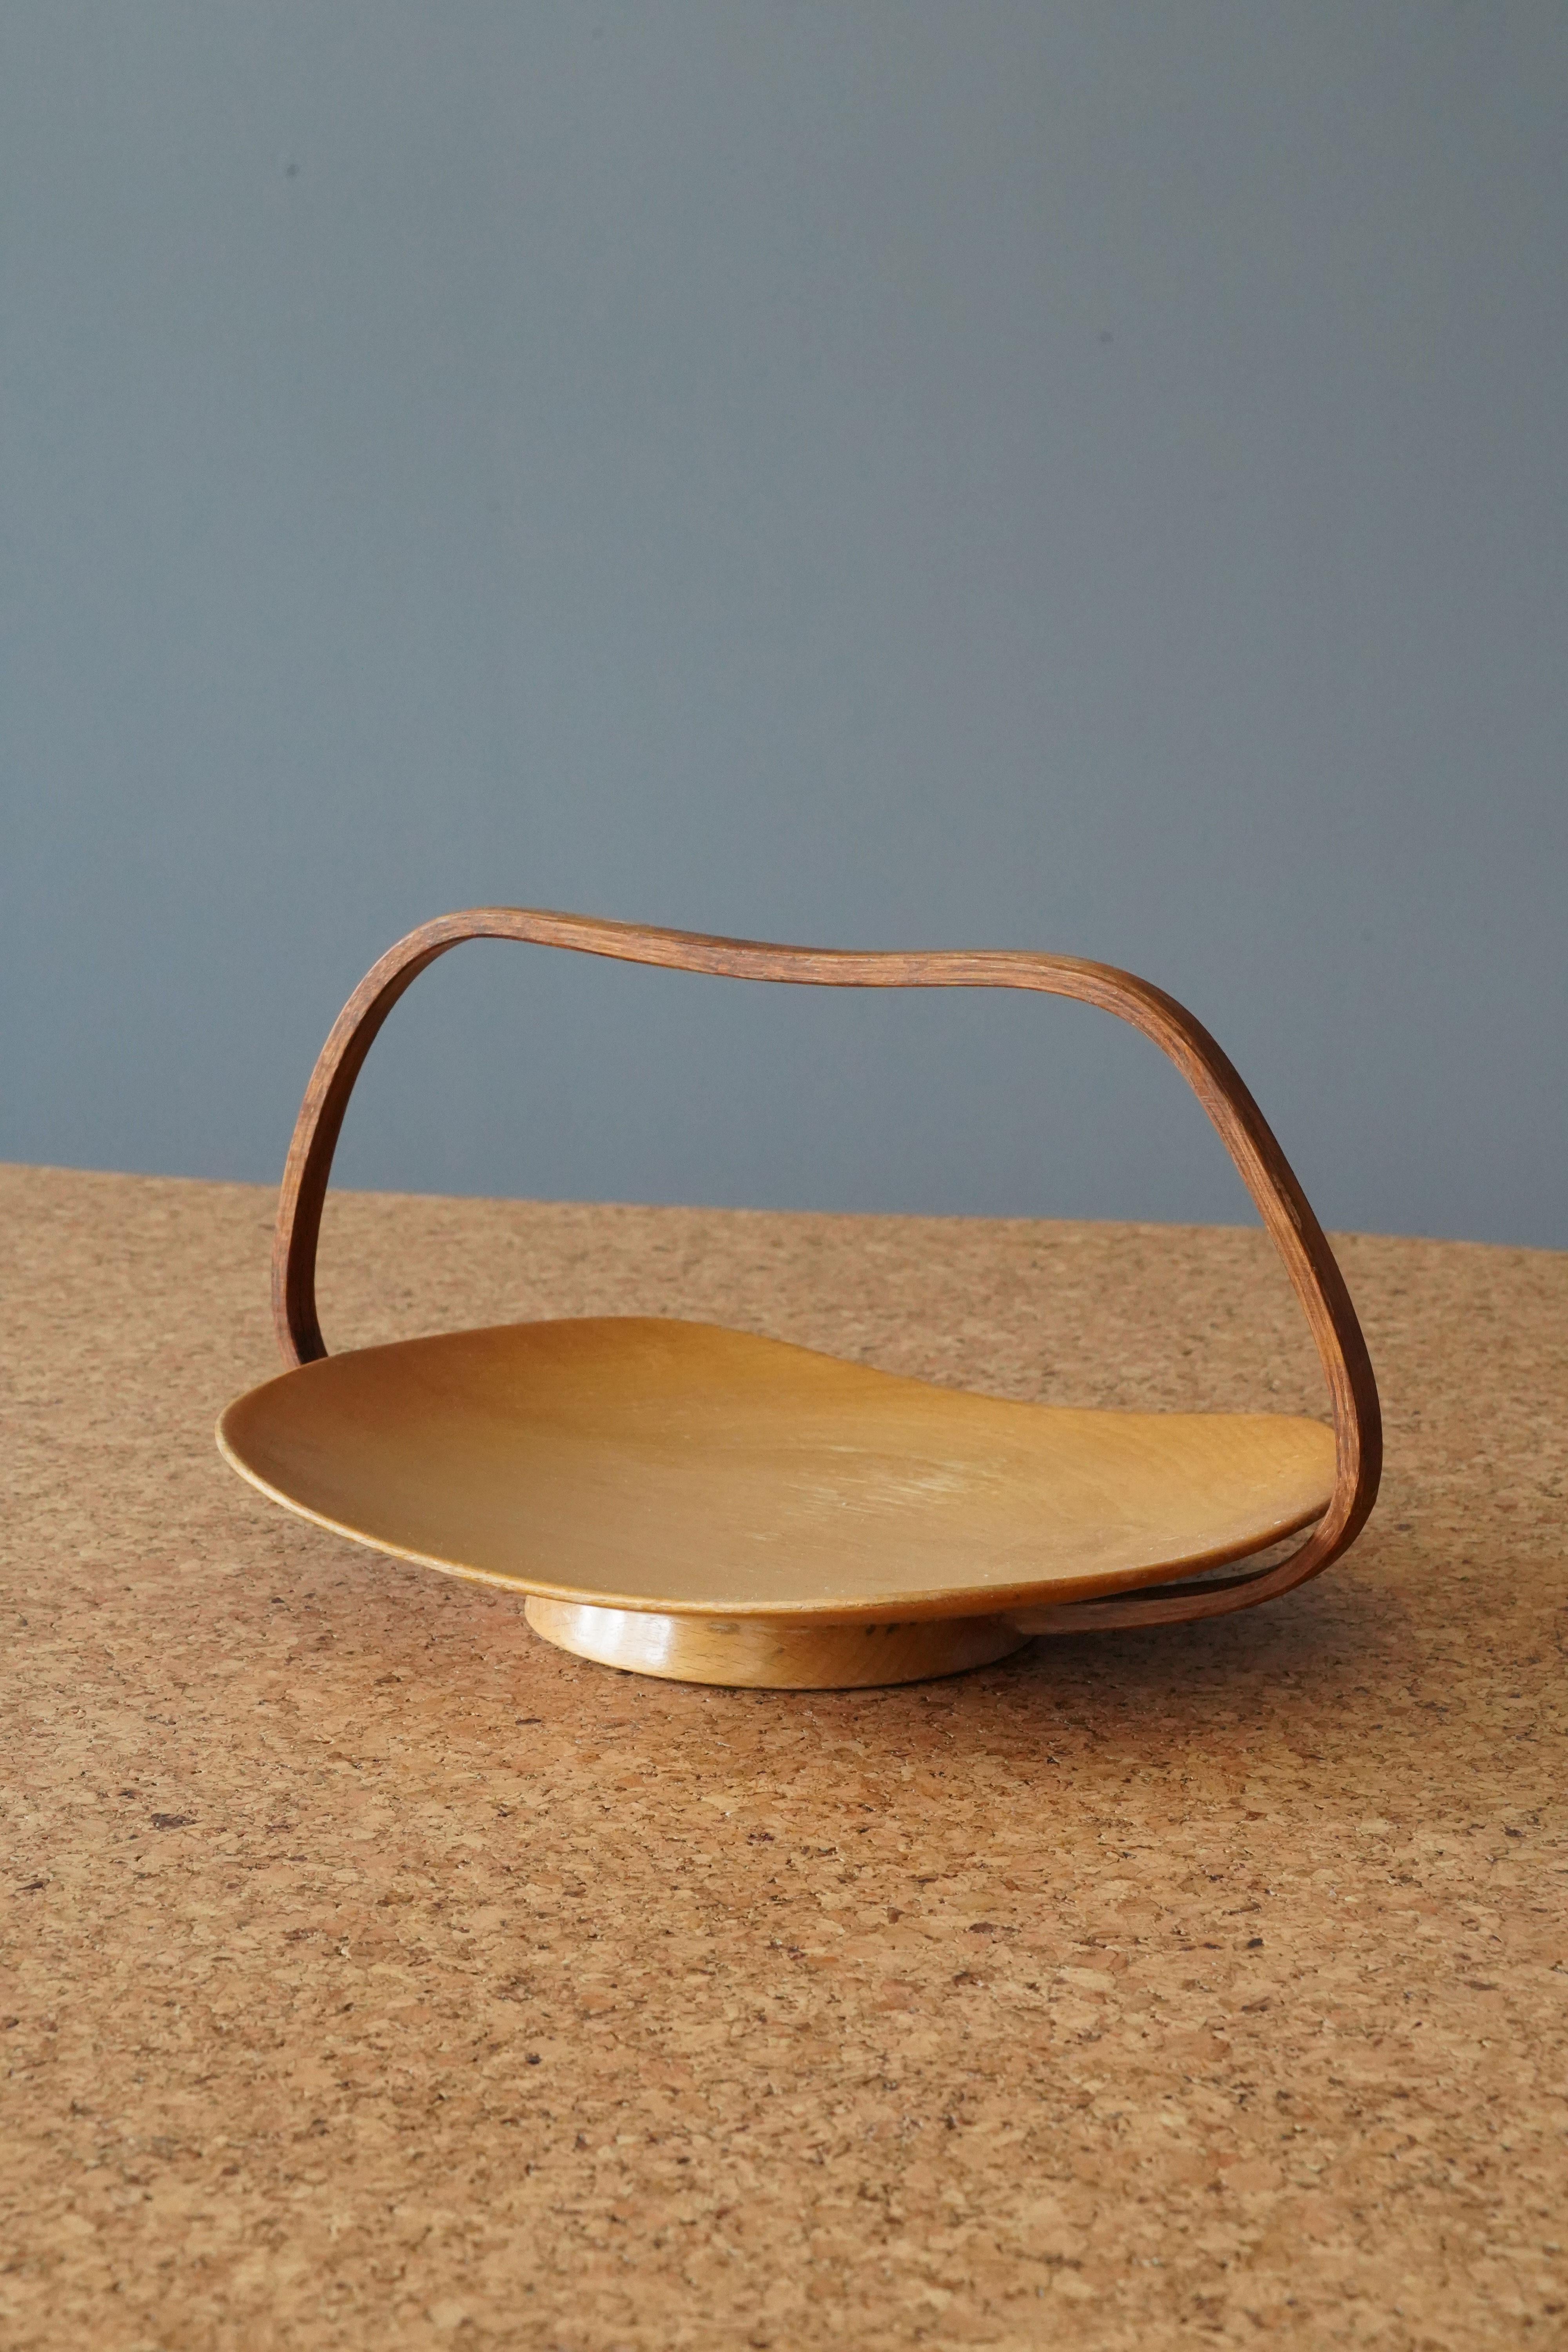 A modernist serving tray. Designed and produced by Steneby, Sweden, c. 1950s-1960s.